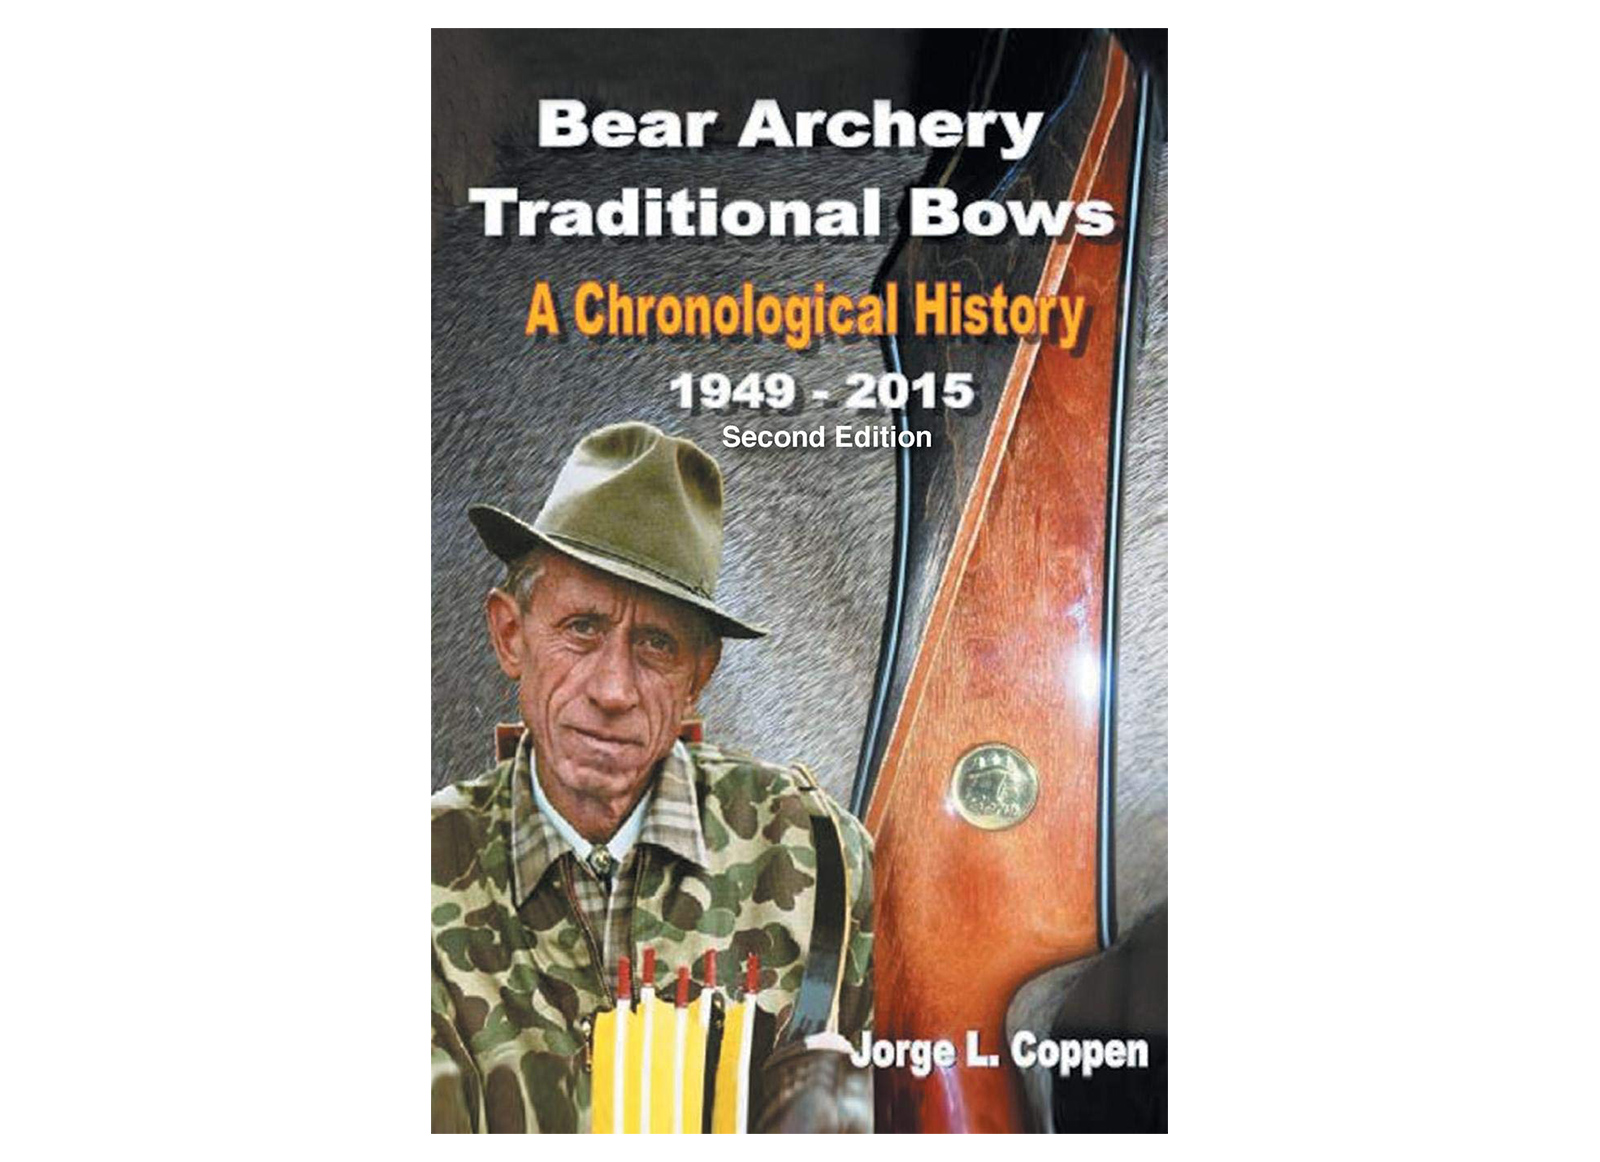 BEAR ARCHERY TRADITIONAL - LIBRO 'A CHRONOLOGICAL HYSTORY' DI JORGE COPPEN